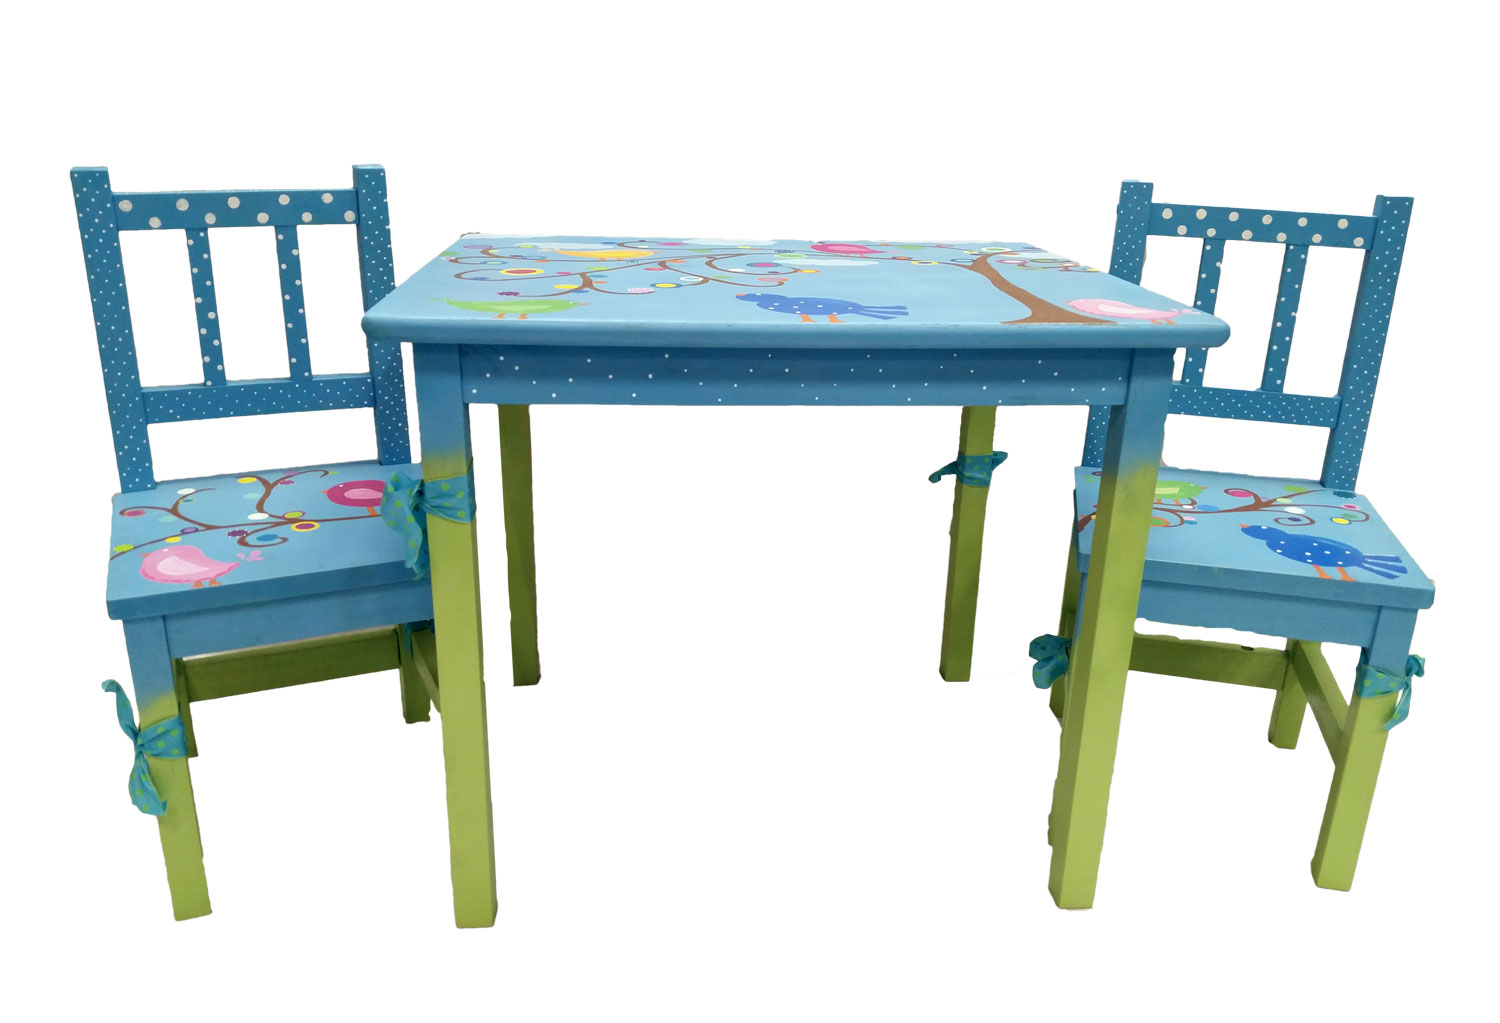 IL_table_chairs_1500.jpg